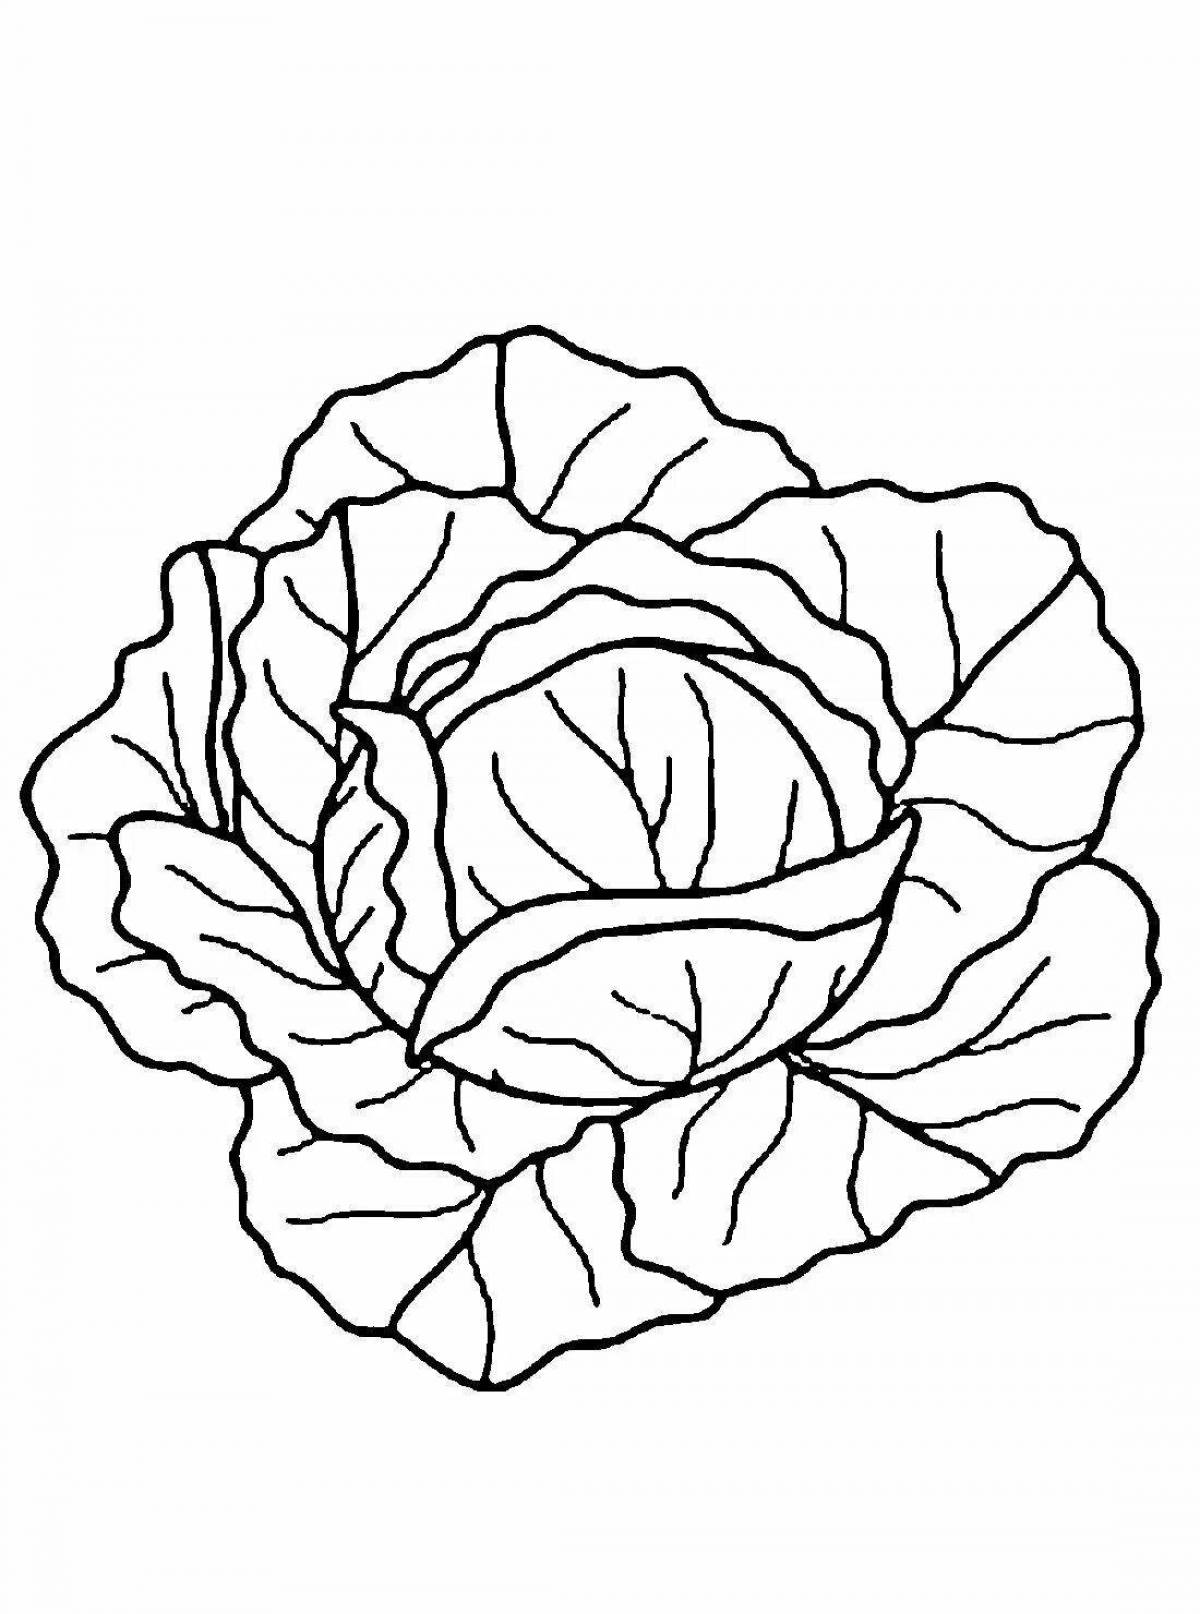 Fun coloring cabbage for kids